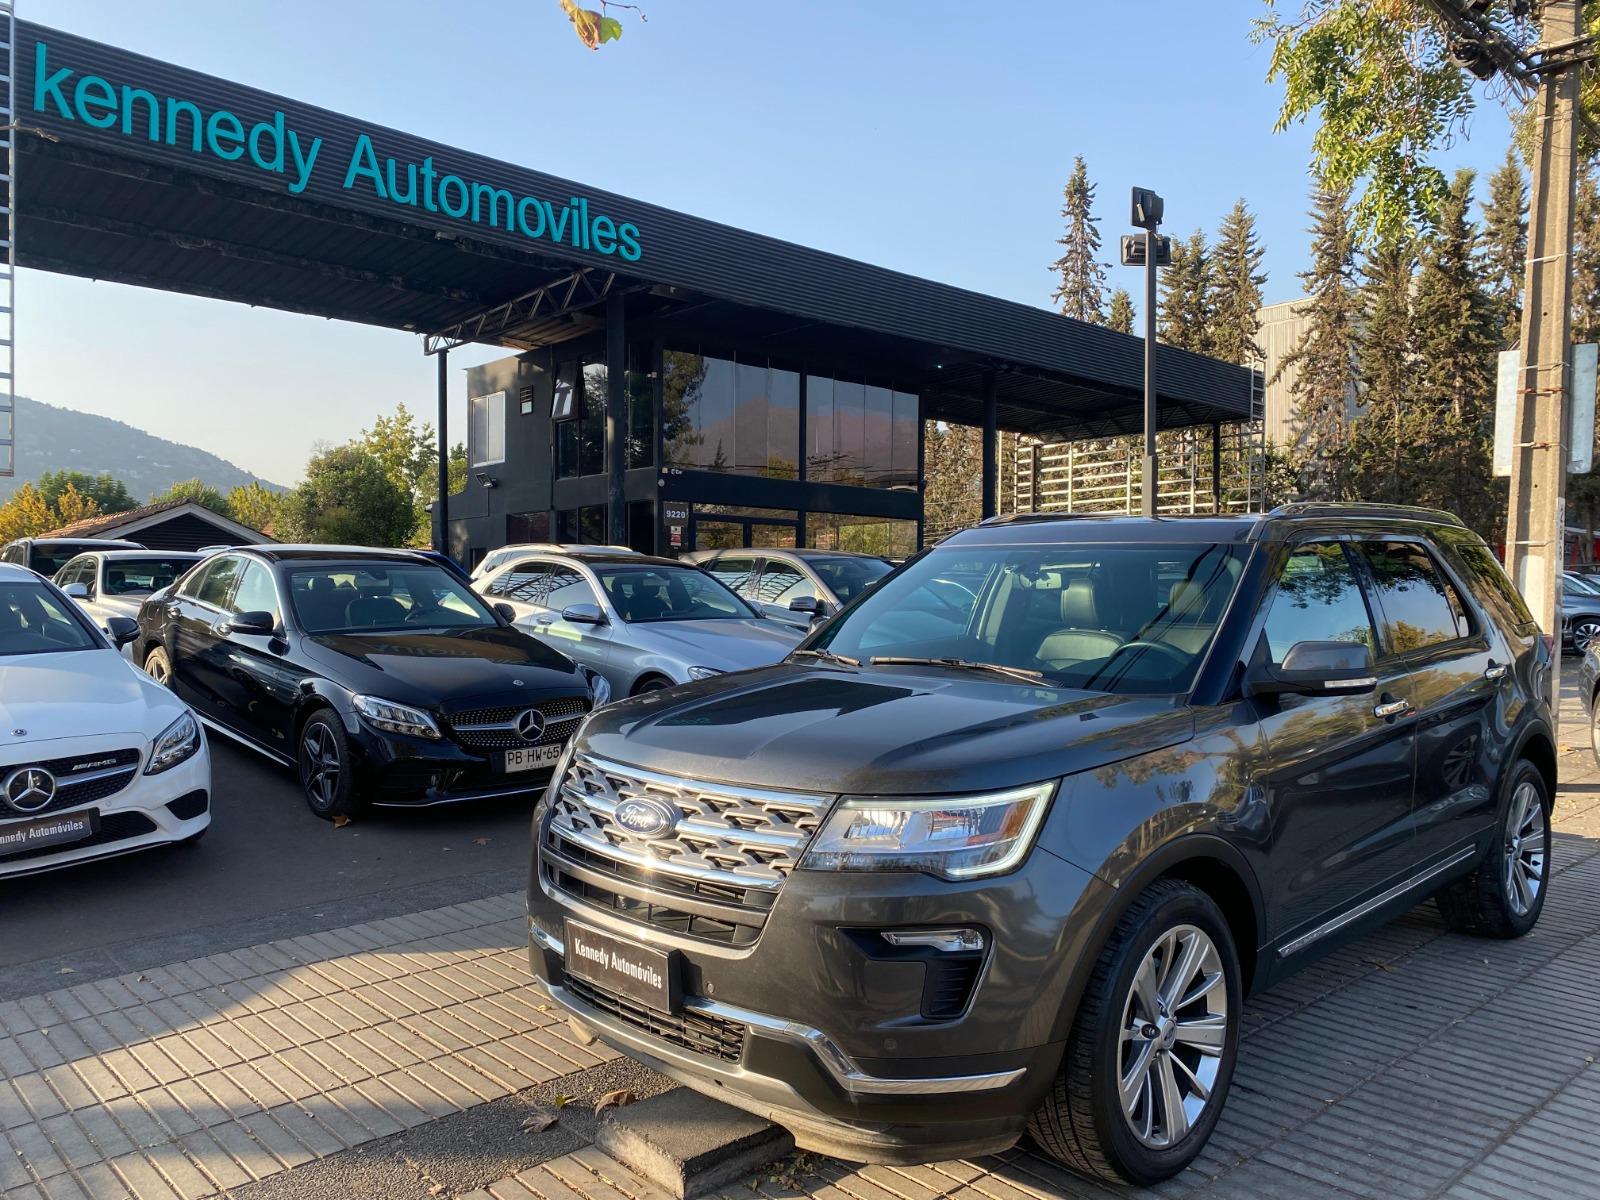 FORD EXPLORER 2.3 limited Ecoboost auto 4WD 2019 Tercera corrida  - KENNEDY AUTOMOVILES